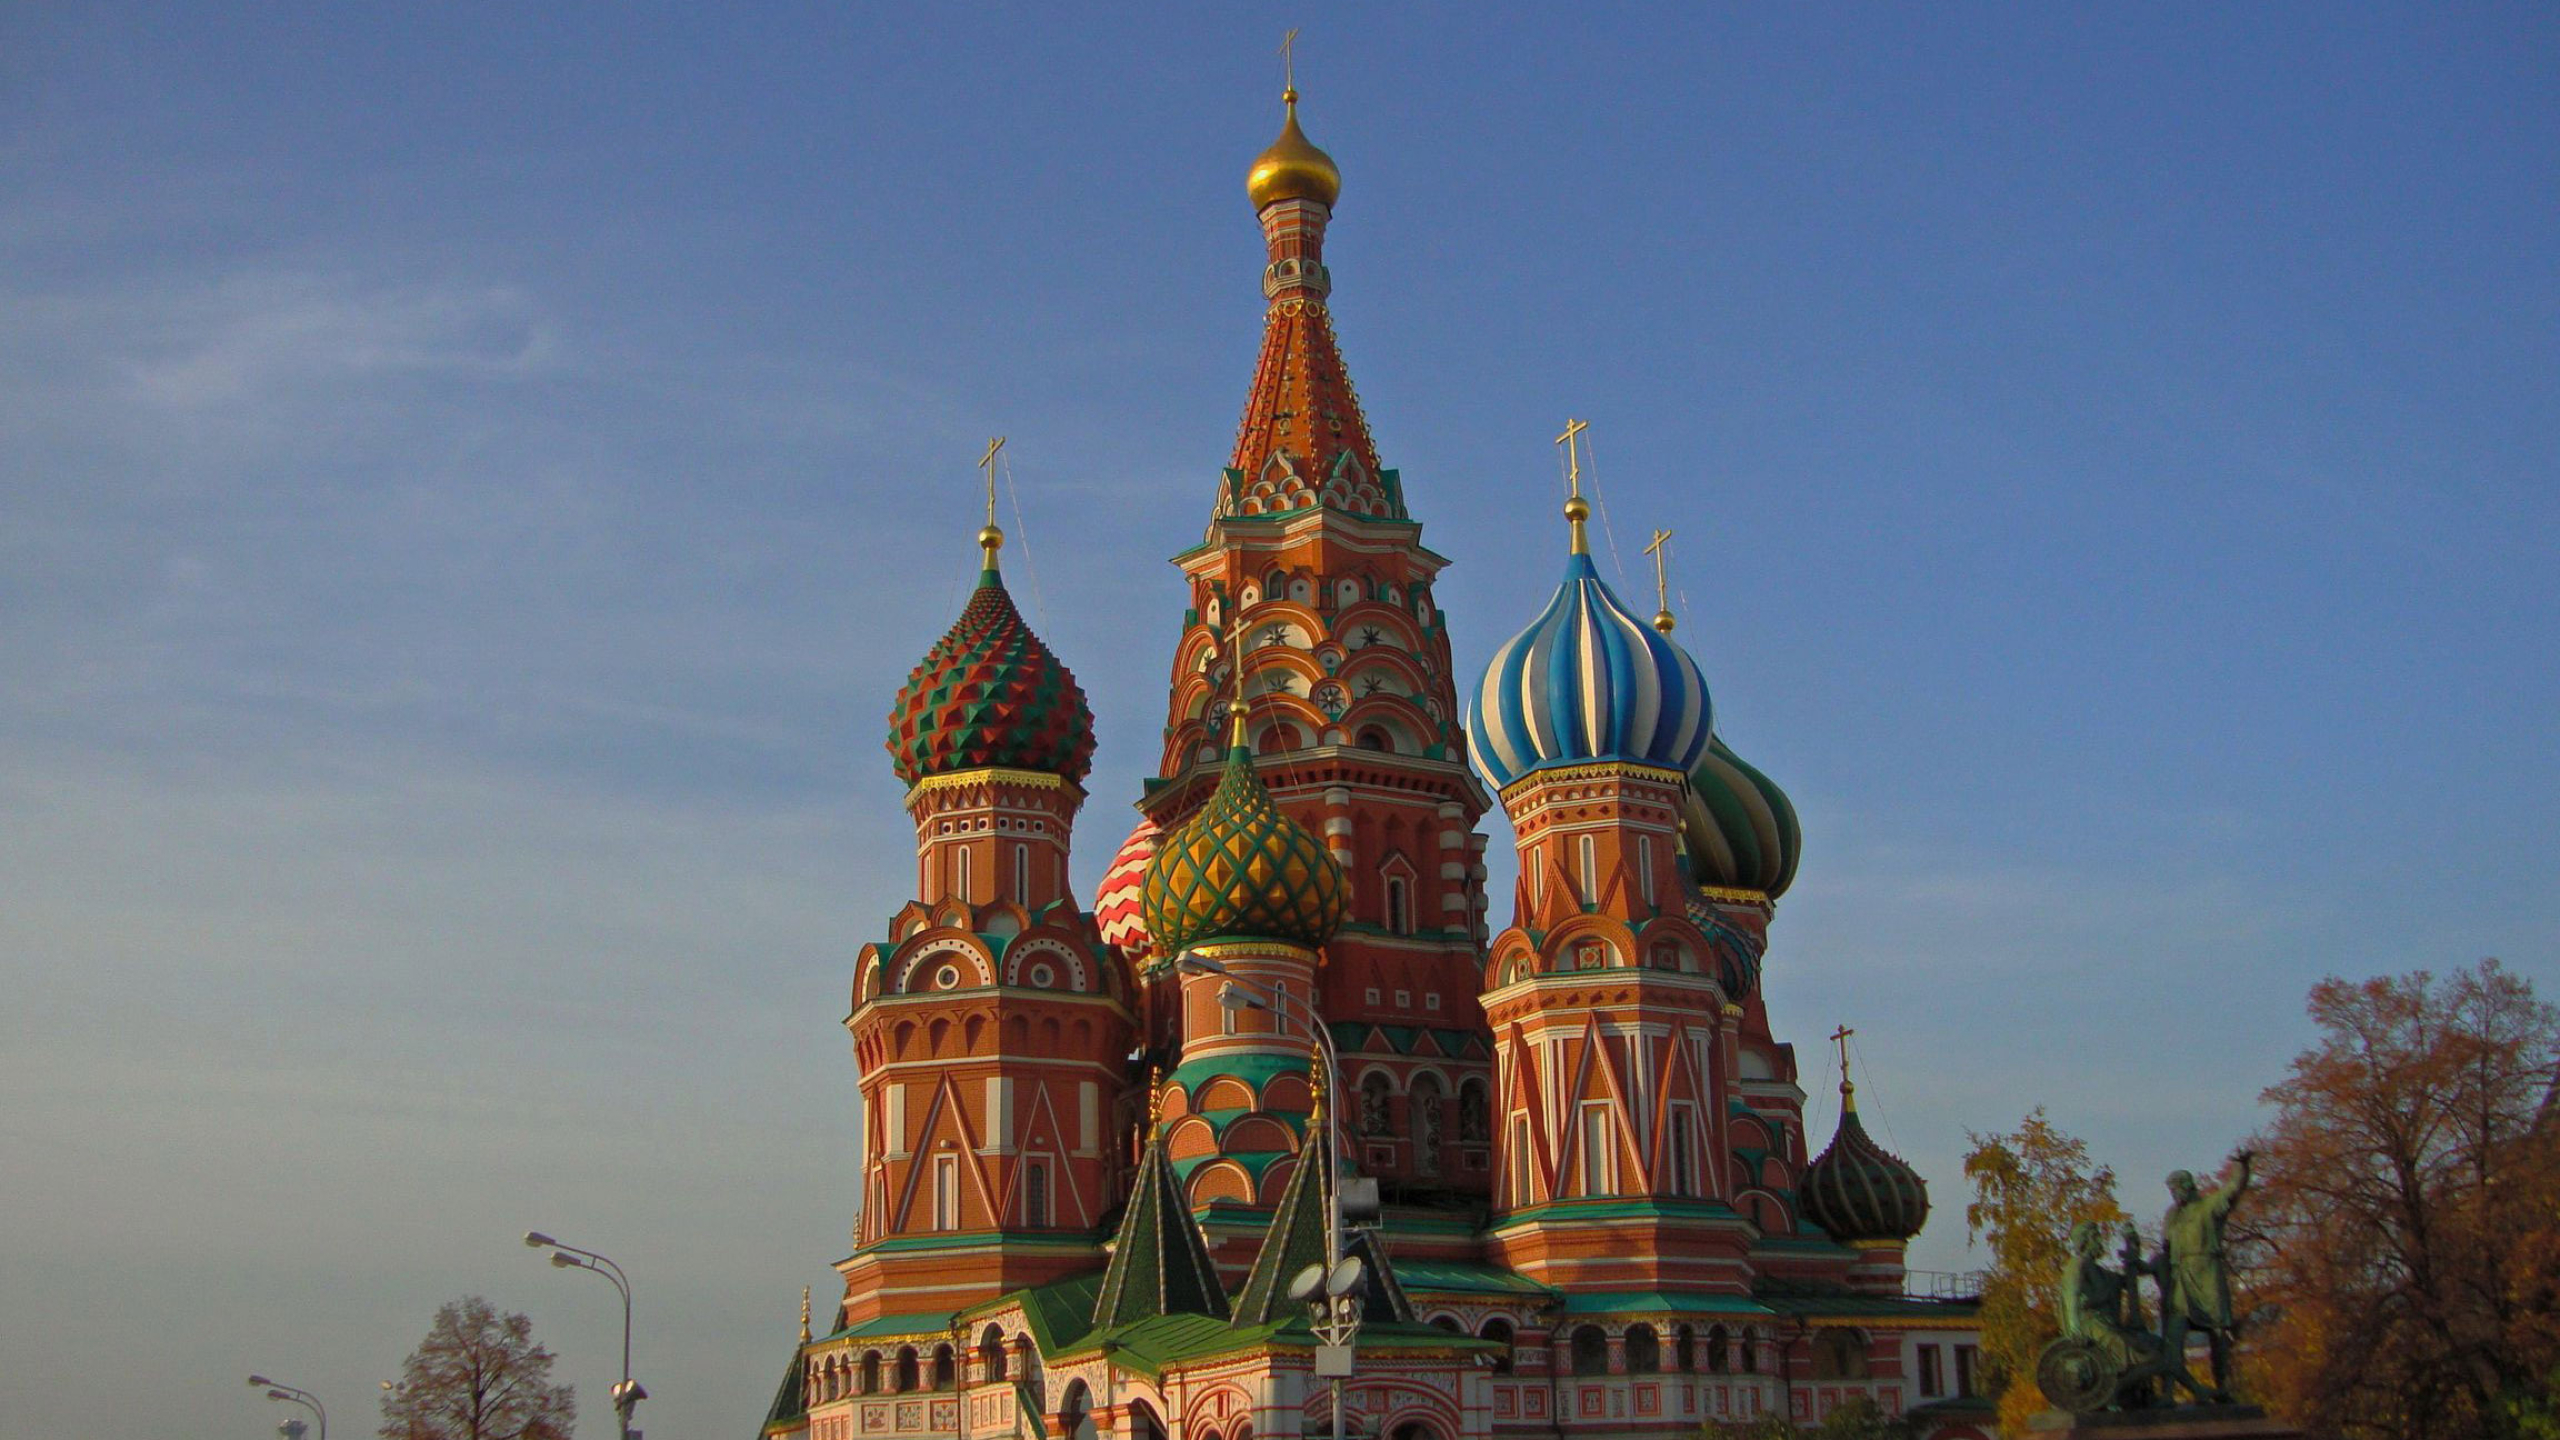 Saint Basil's Cathedral, World-class wallpapers, Architectural wonder, Breathtaking imagery, 2560x1440 HD Desktop